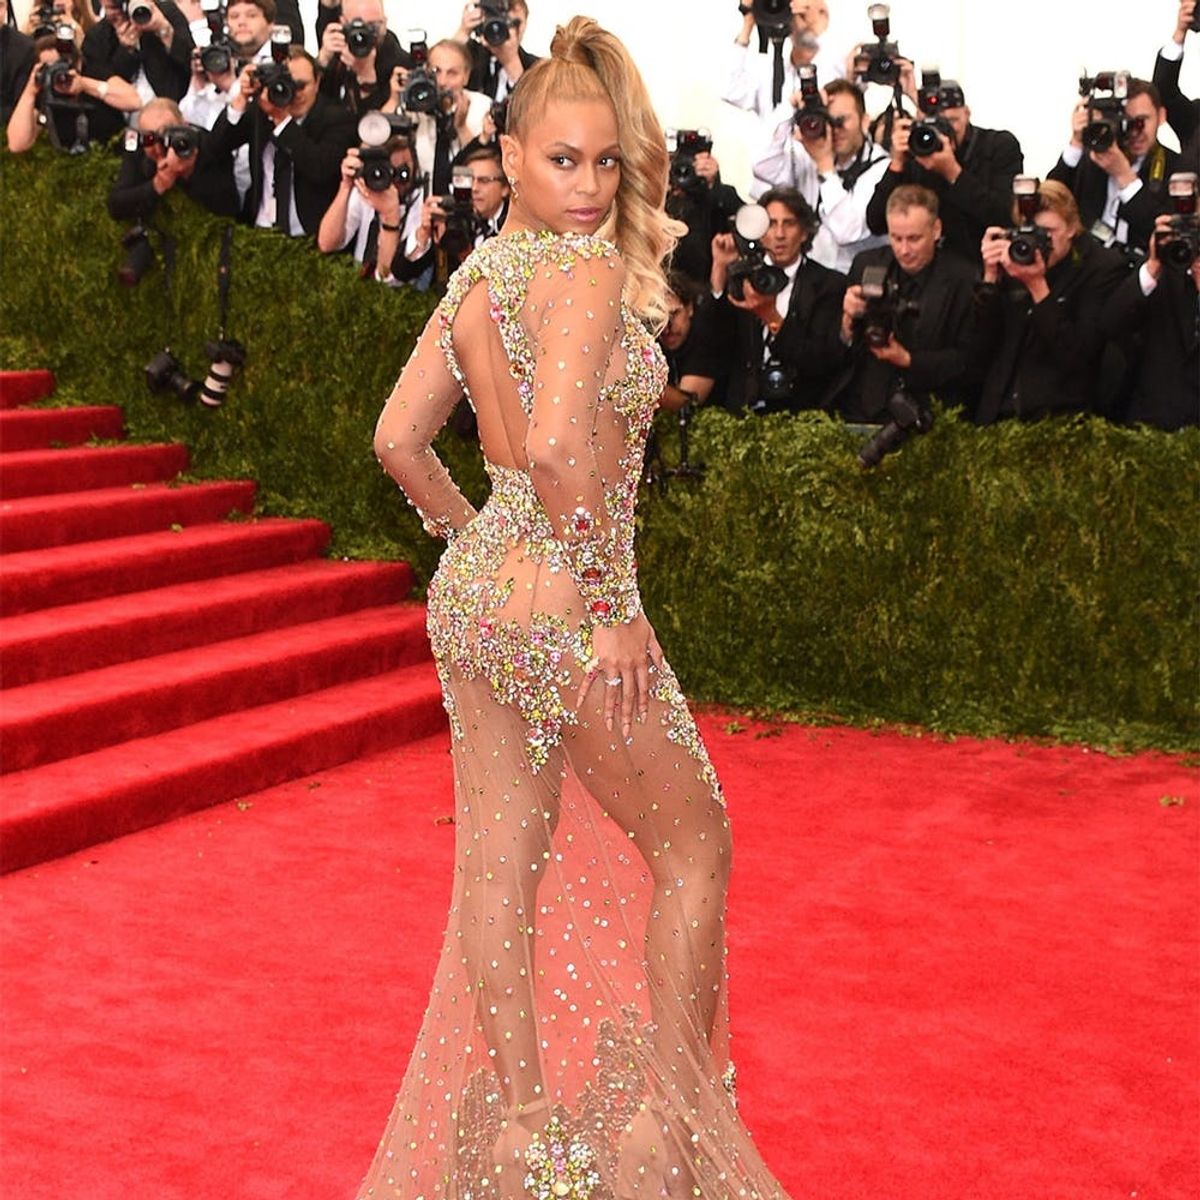 This High School Girl Recreated Beyoncé’s Met Gala Look for Prom and It’s AMAZING